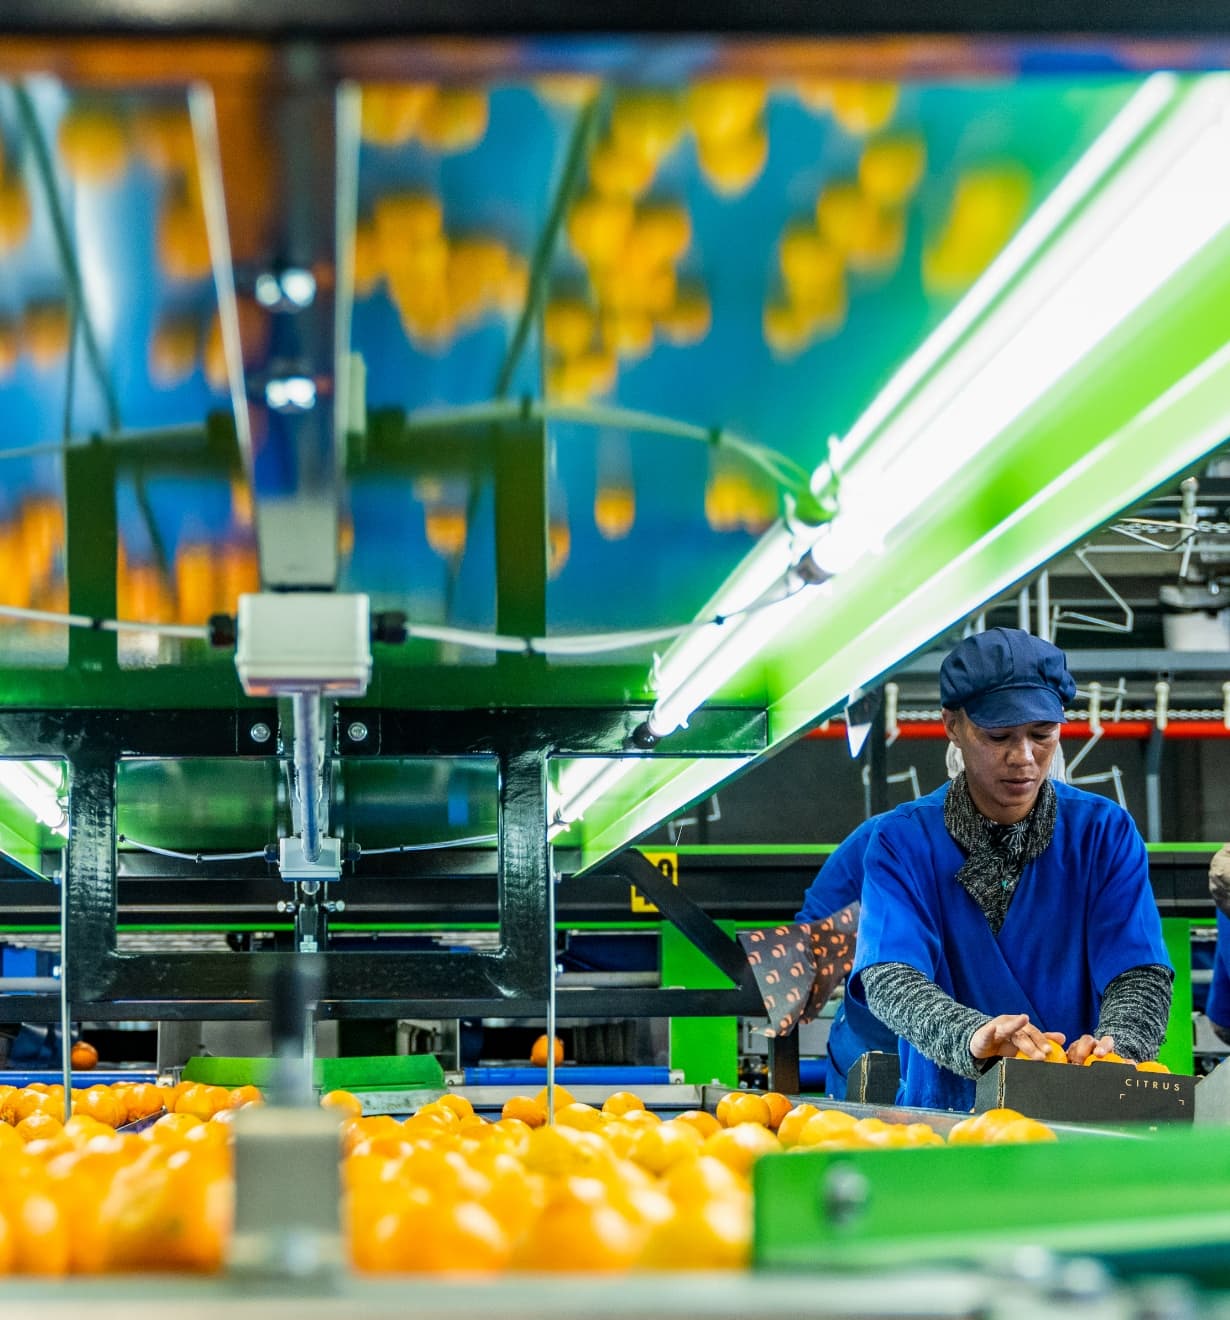 Oranges going down the conveyer